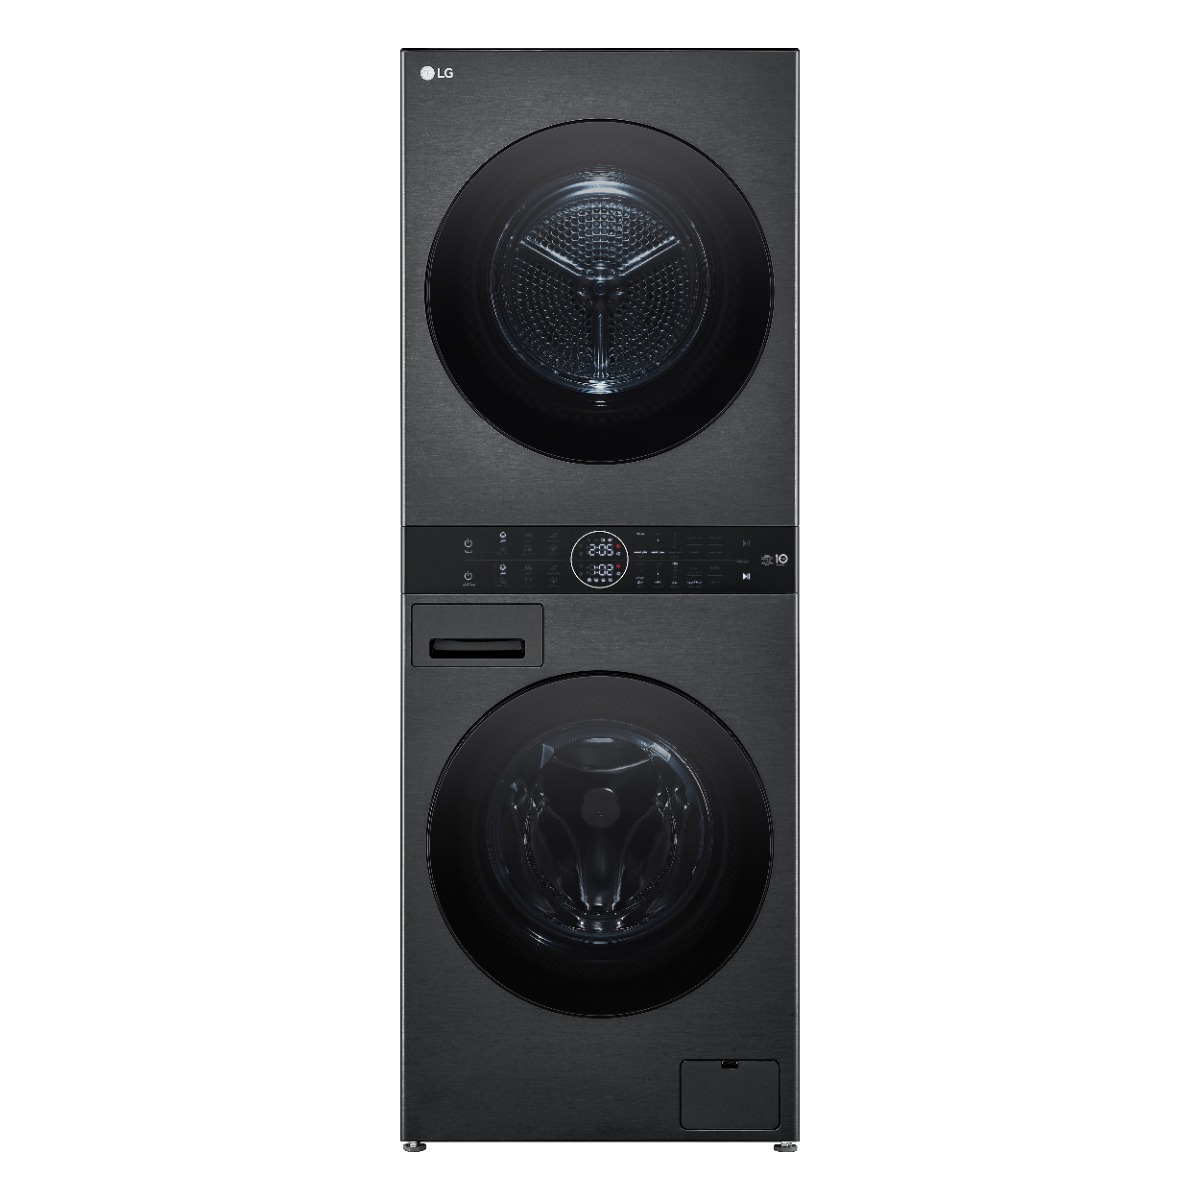 LG Front Load Washing Machine, 13 Kg, Dry 100%, With 10 kg Dryer, Contorl Panel, Black - WK1310BST